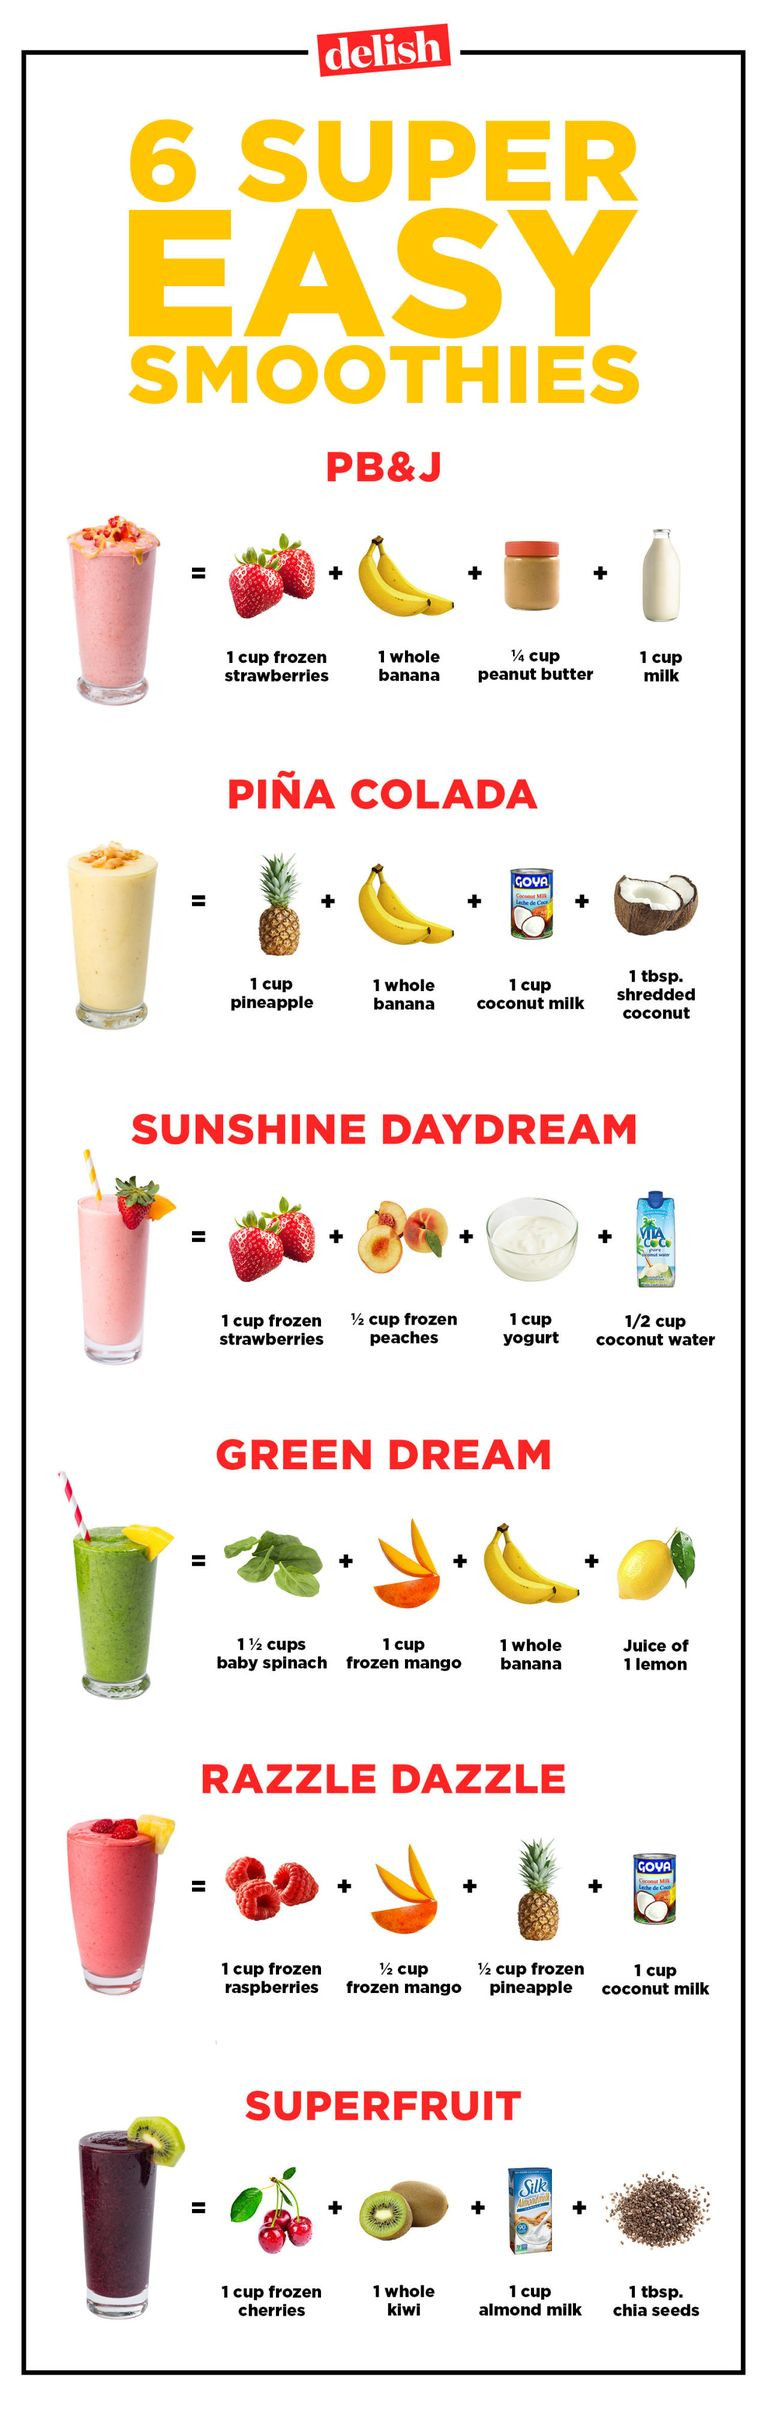 Healthy Smoothie Recipes For Kids
 20 Healthy Fruit Smoothie Recipes How to Make Healthy